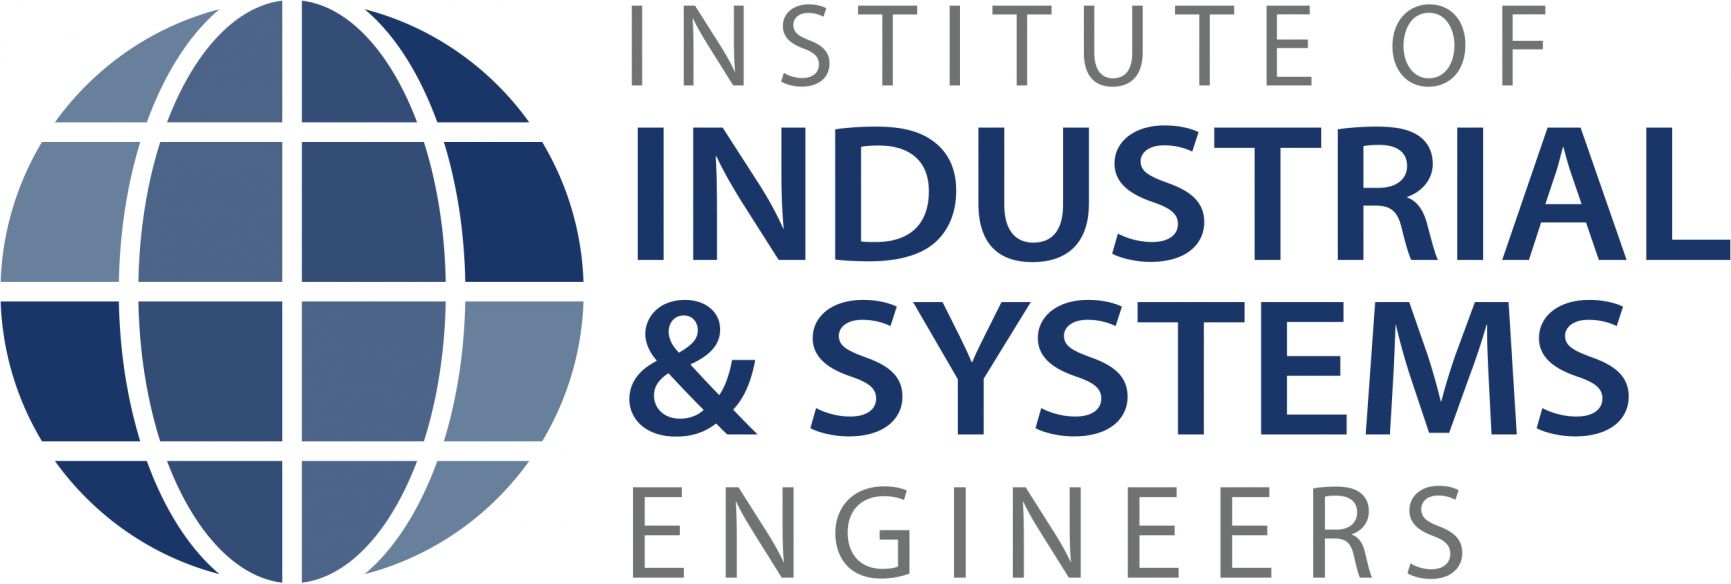 Institute of Industrial and Systems Engineers